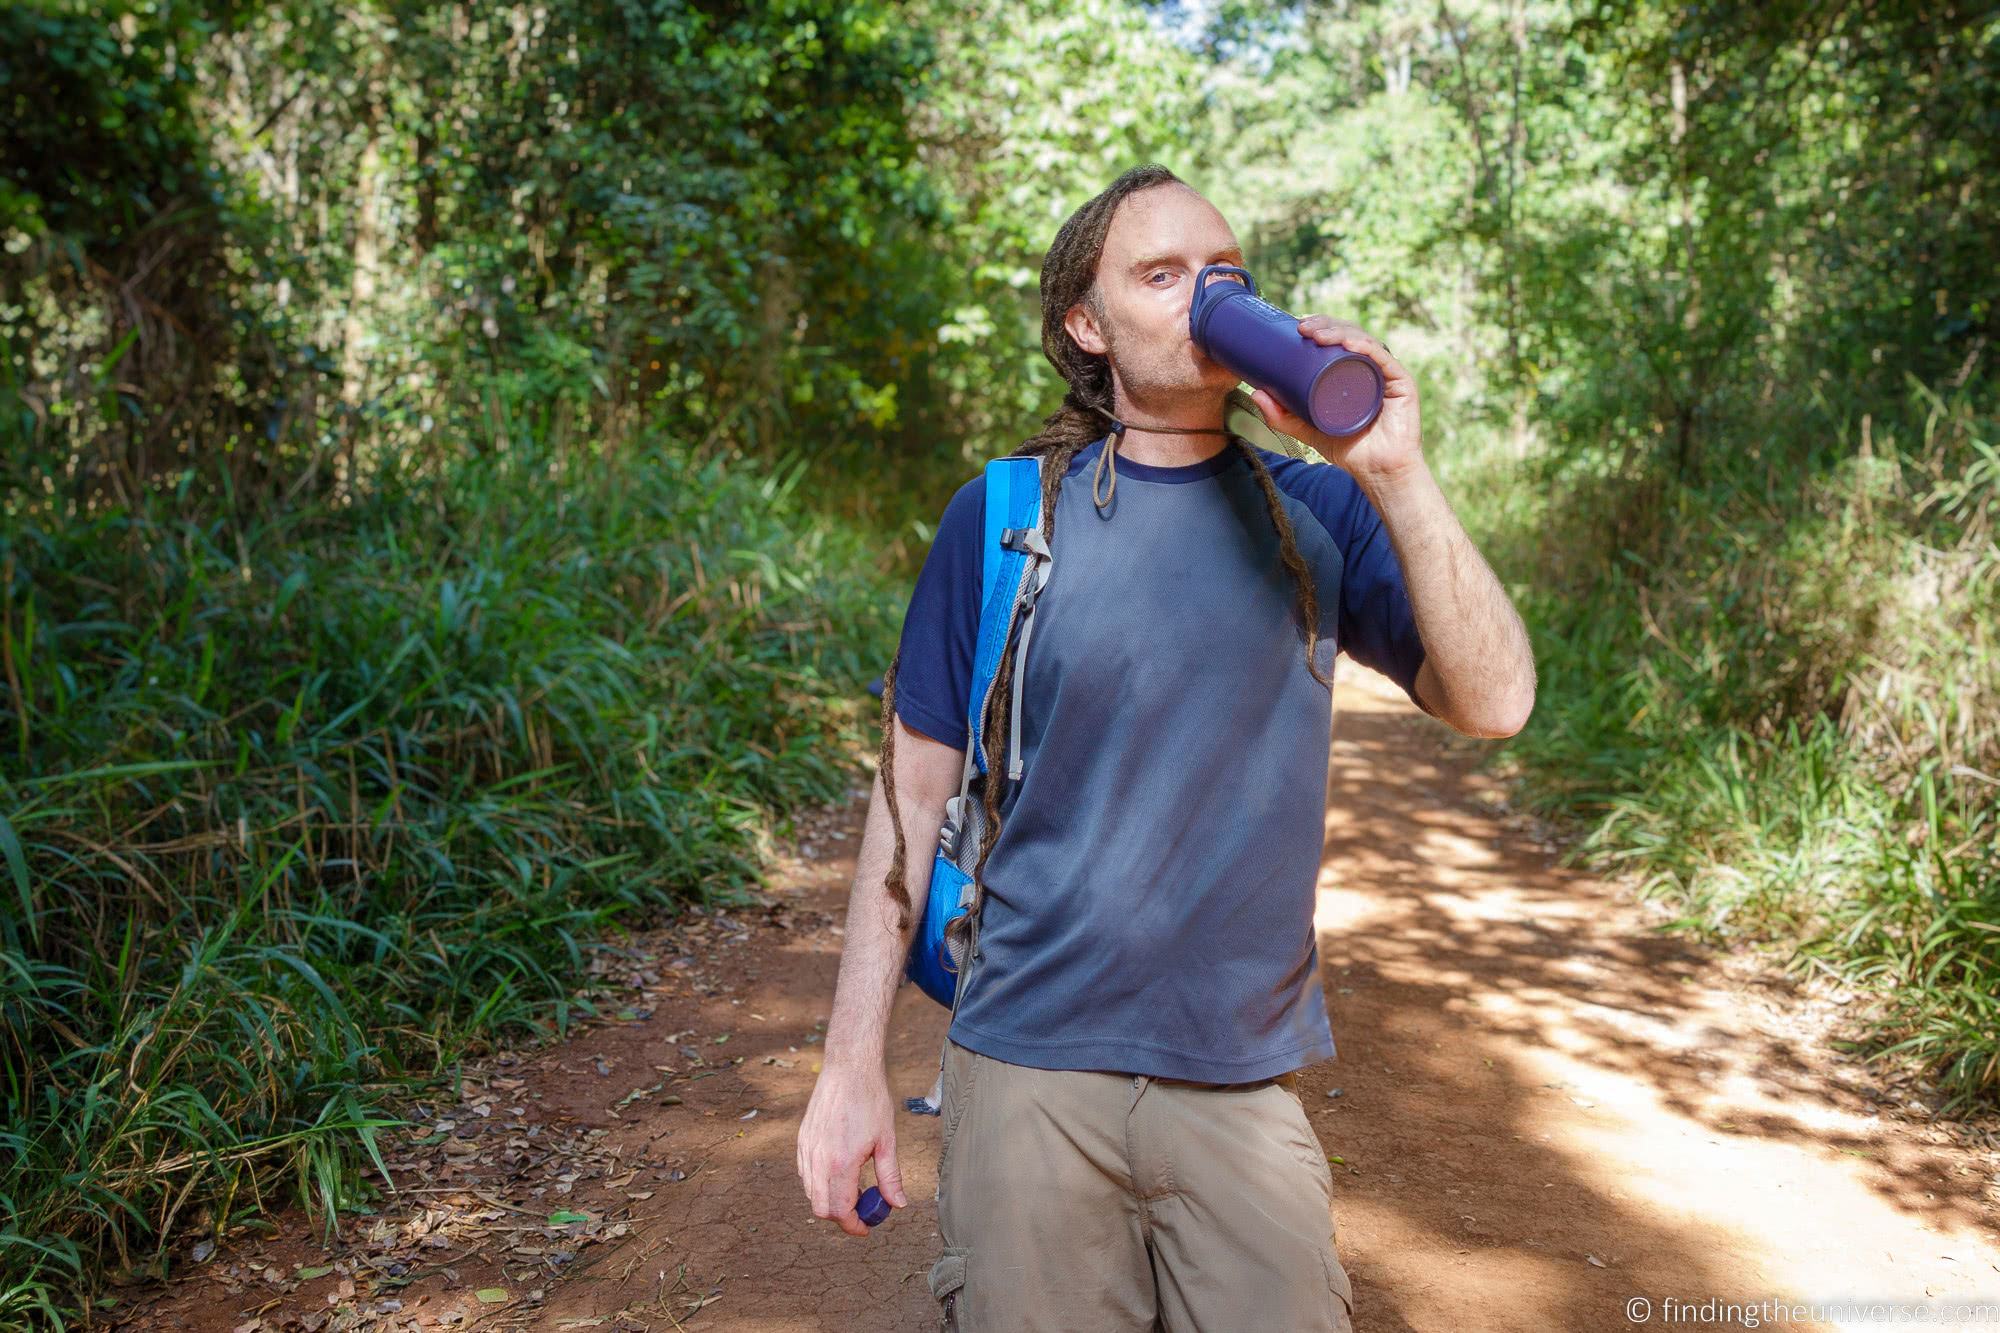 The Best Travel Water Filters For Every Budget - Tested & Ranked